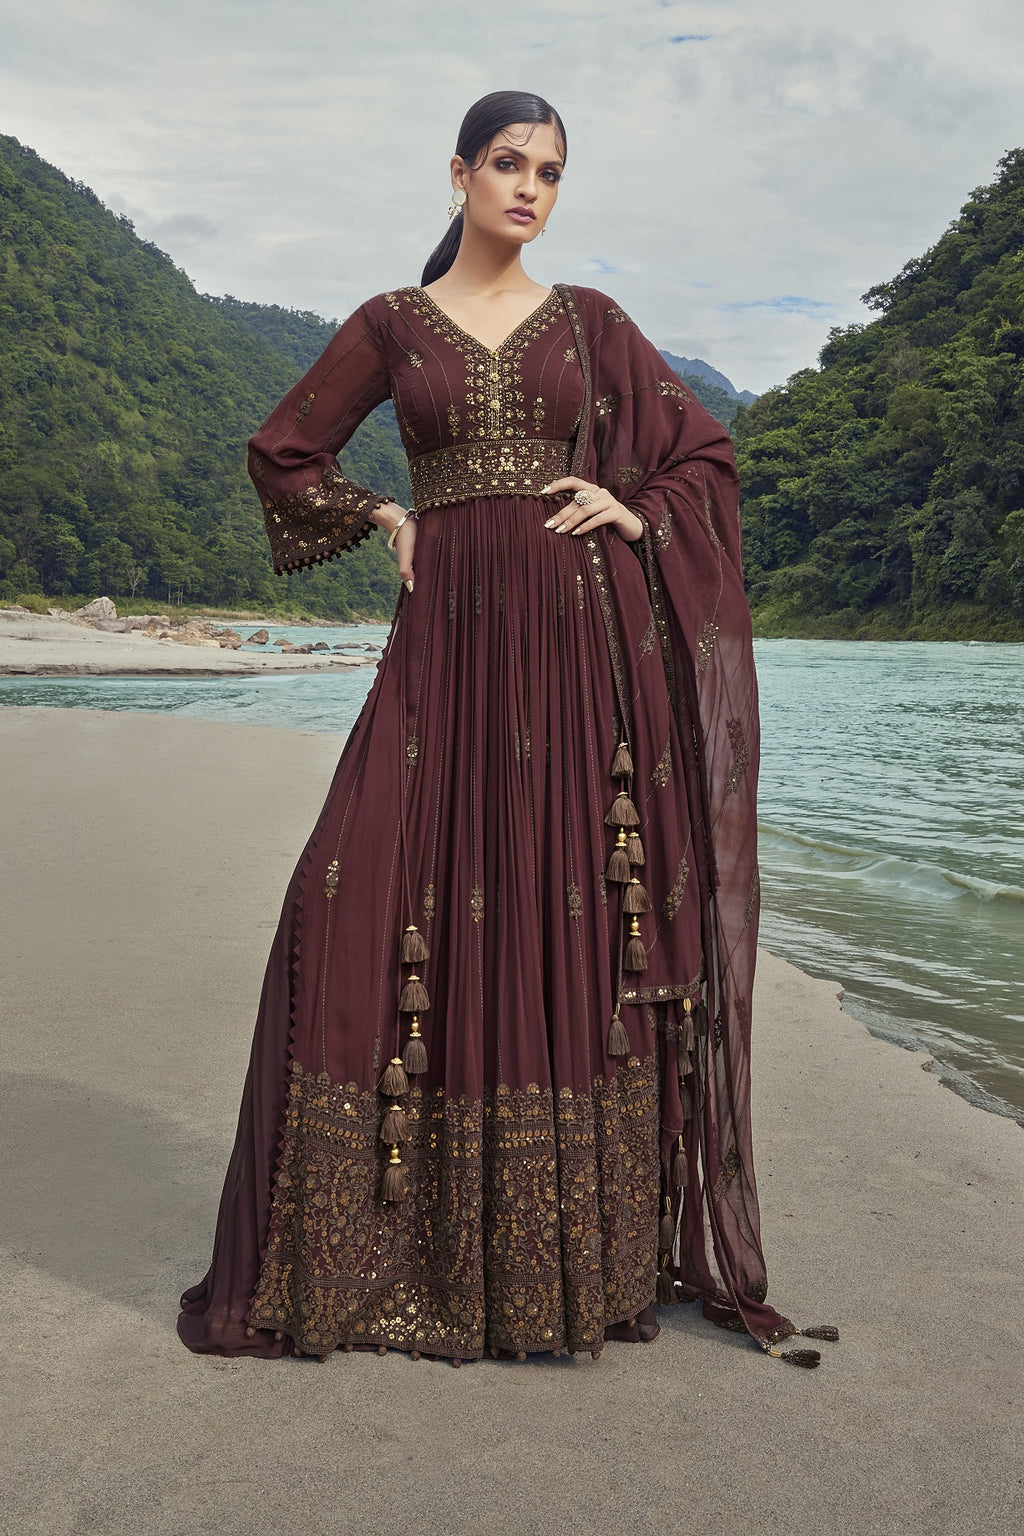 Buy a beautiful maroon embroidered georgette sharara suit with a dupatta. The suit is perfect for occasions like parties and festivals. Shop online from Pure Elegance. online in the USA with a dupatta. Dazzle on weddings and special occasions with exquisite Indian designer dresses, sharara suits, Anarkali suits, and wedding lehengas from Pure Elegance Indian fashion store in the USA.